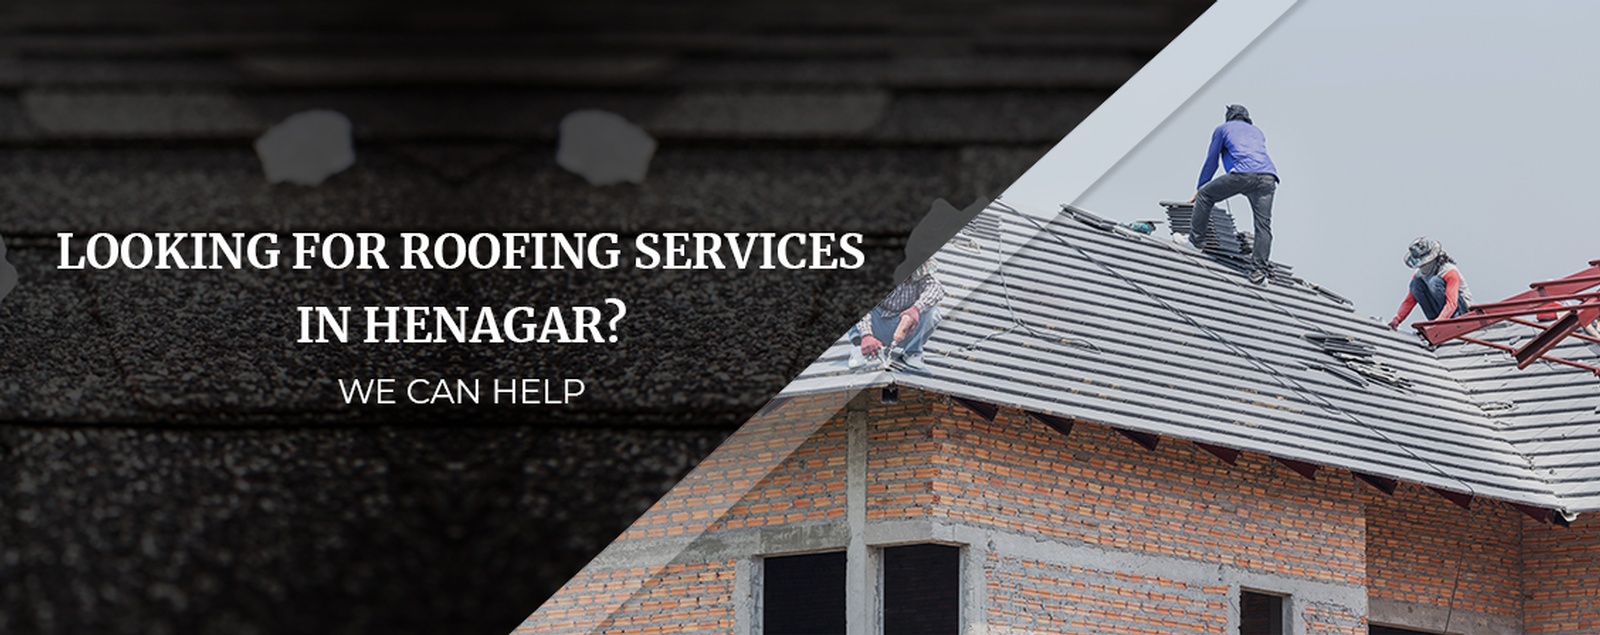  Looking For Roofing Services In Henagar We Can Help